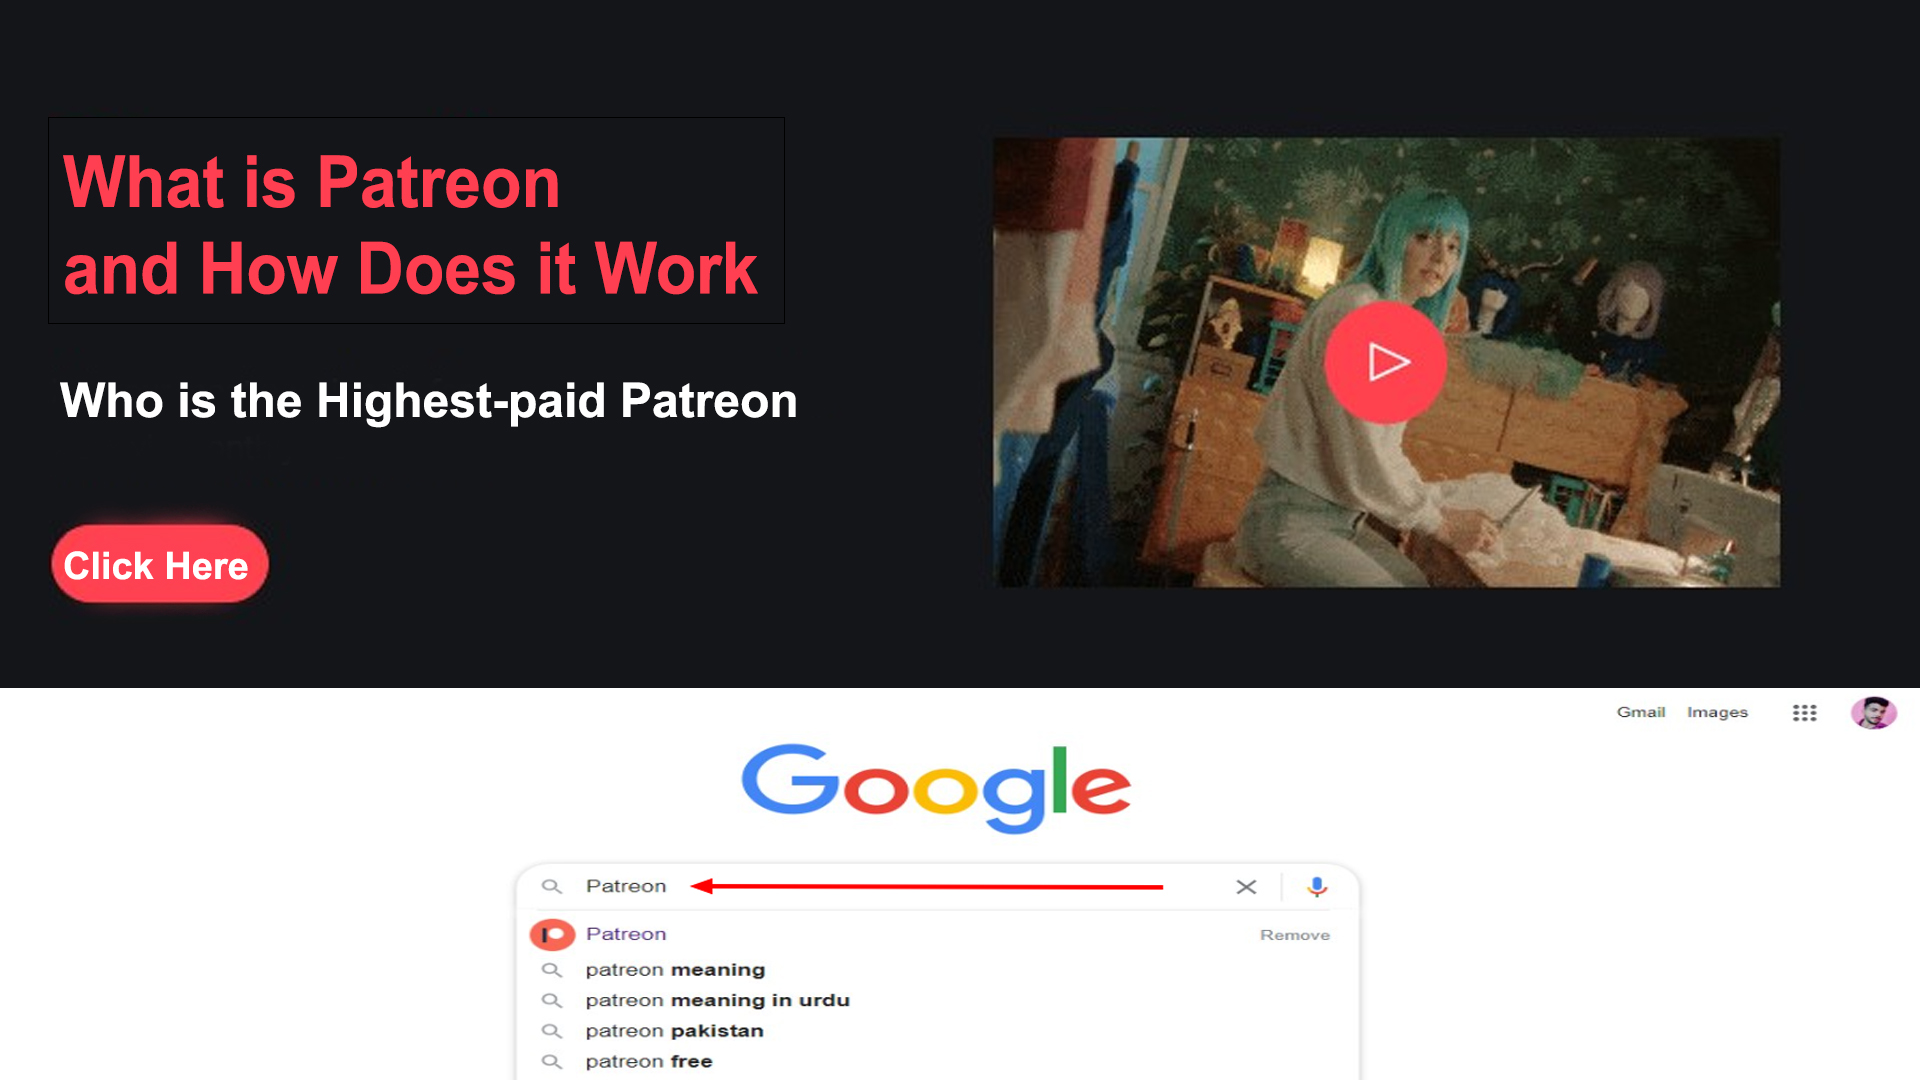 What is Patreon and How Does it Work